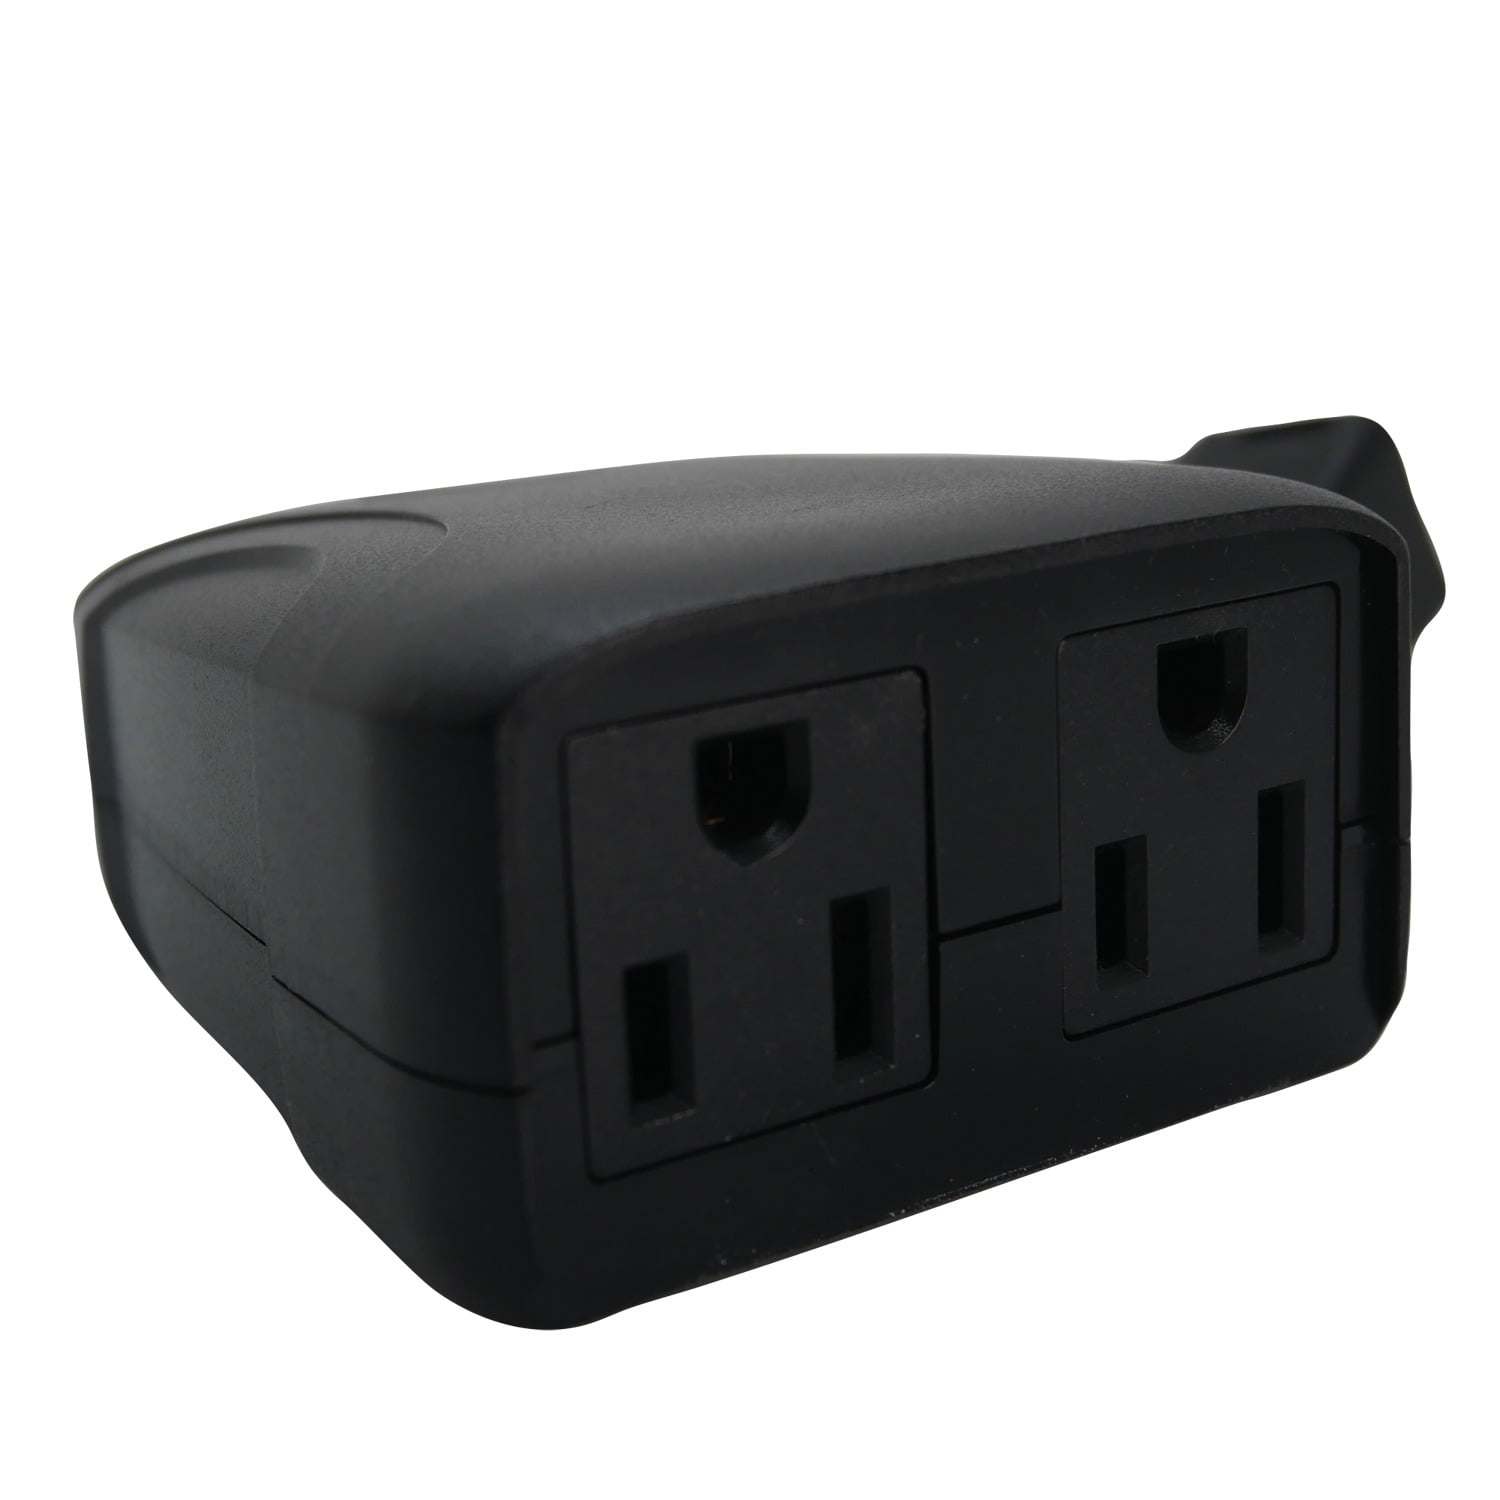 Teckin SS31 Outdoor Smart Plug Wi-Fi Outlet with 2 Sockets